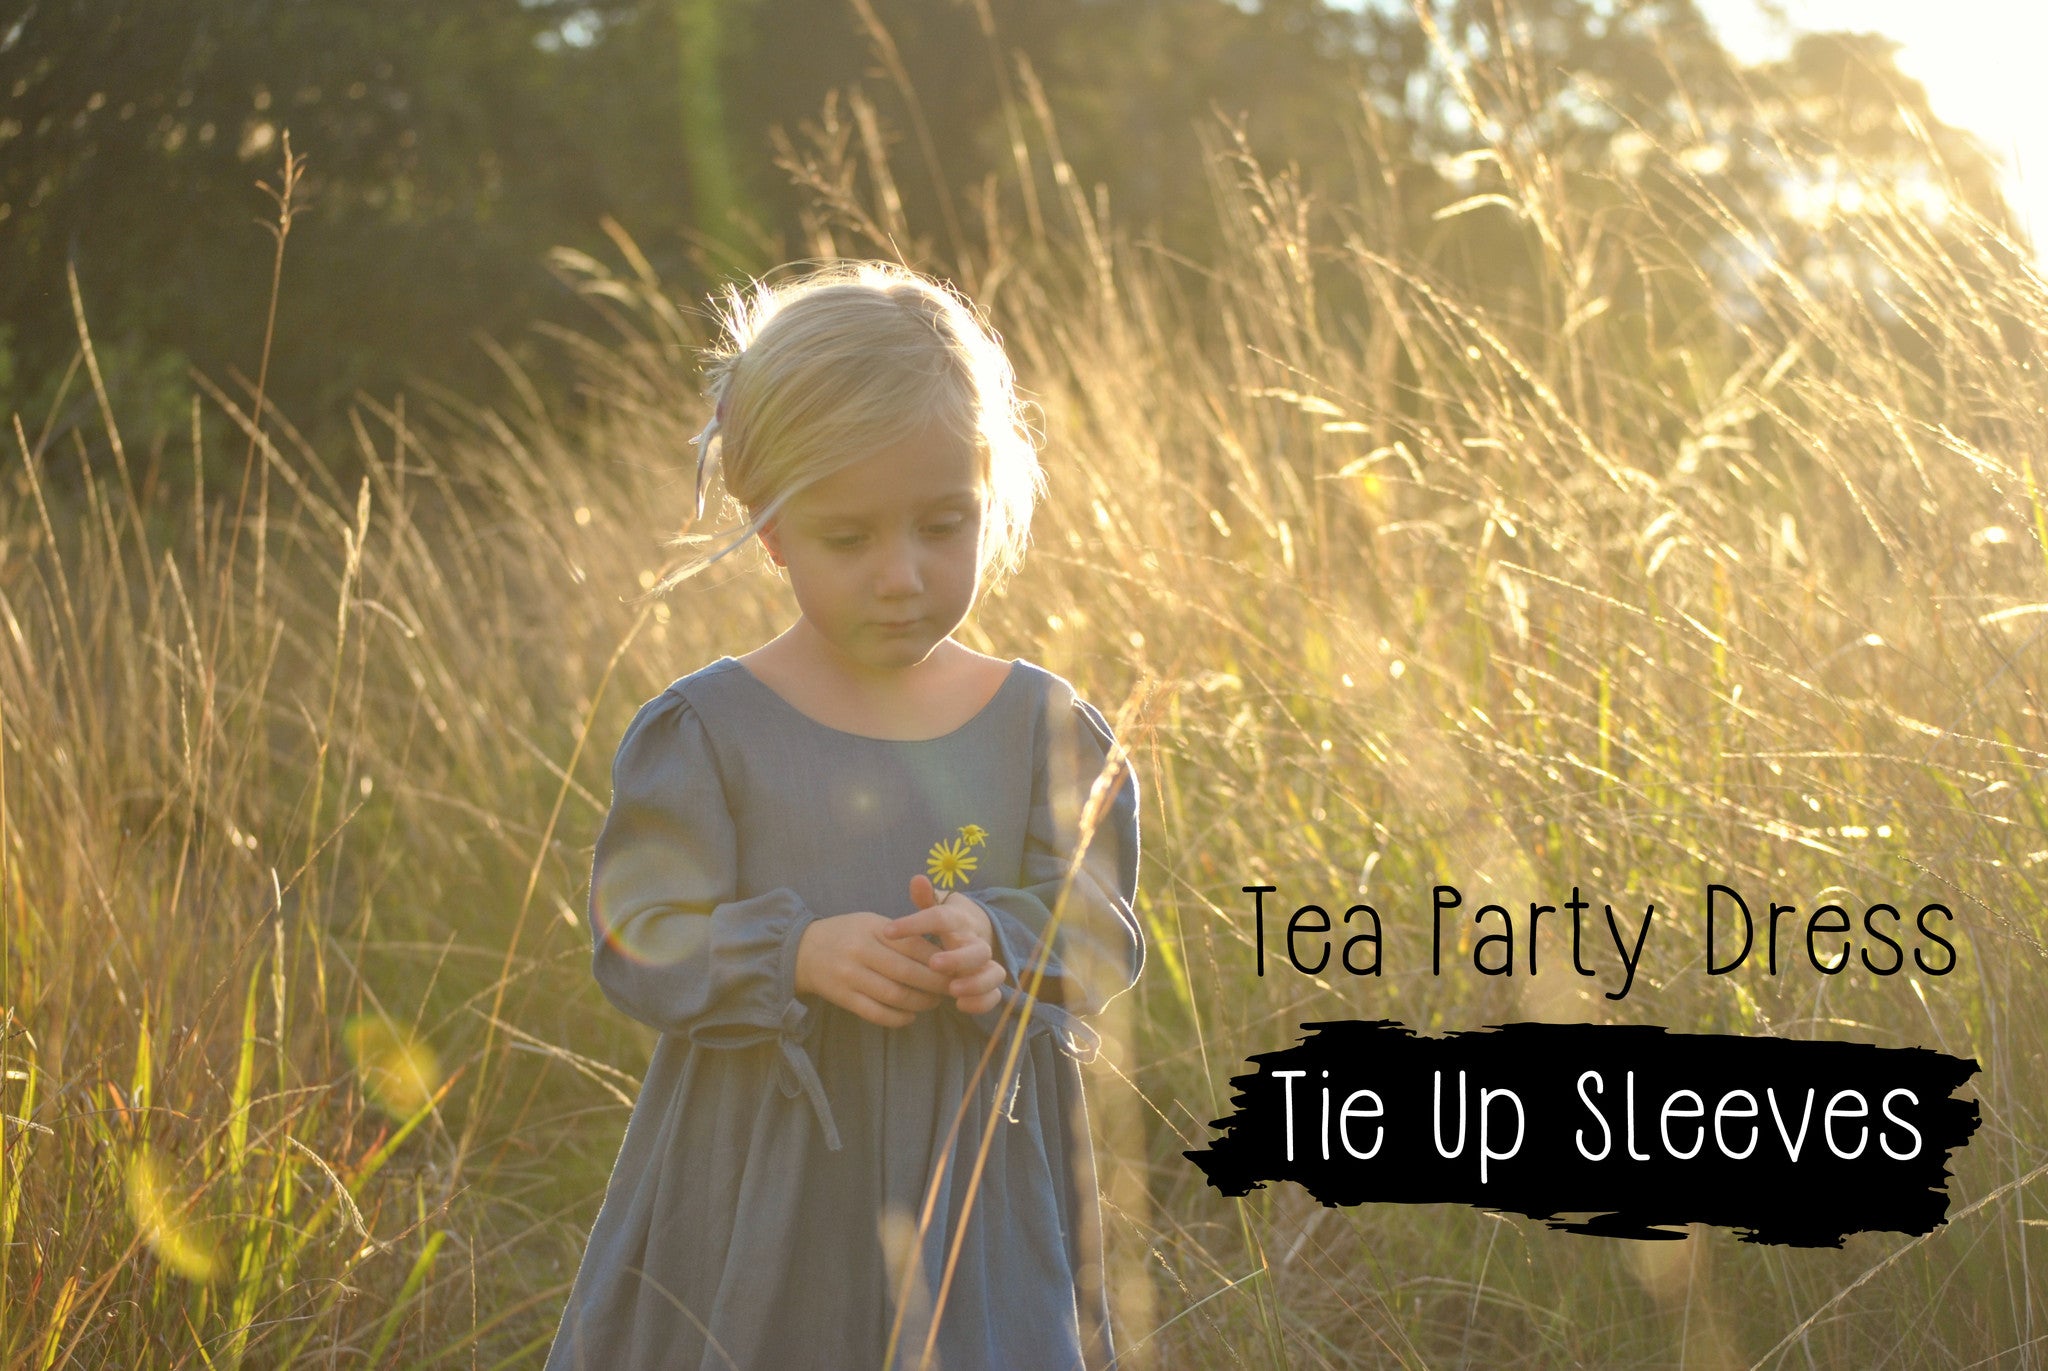 PATTERN HACK - Tea Party Dress with Tie Sleeves